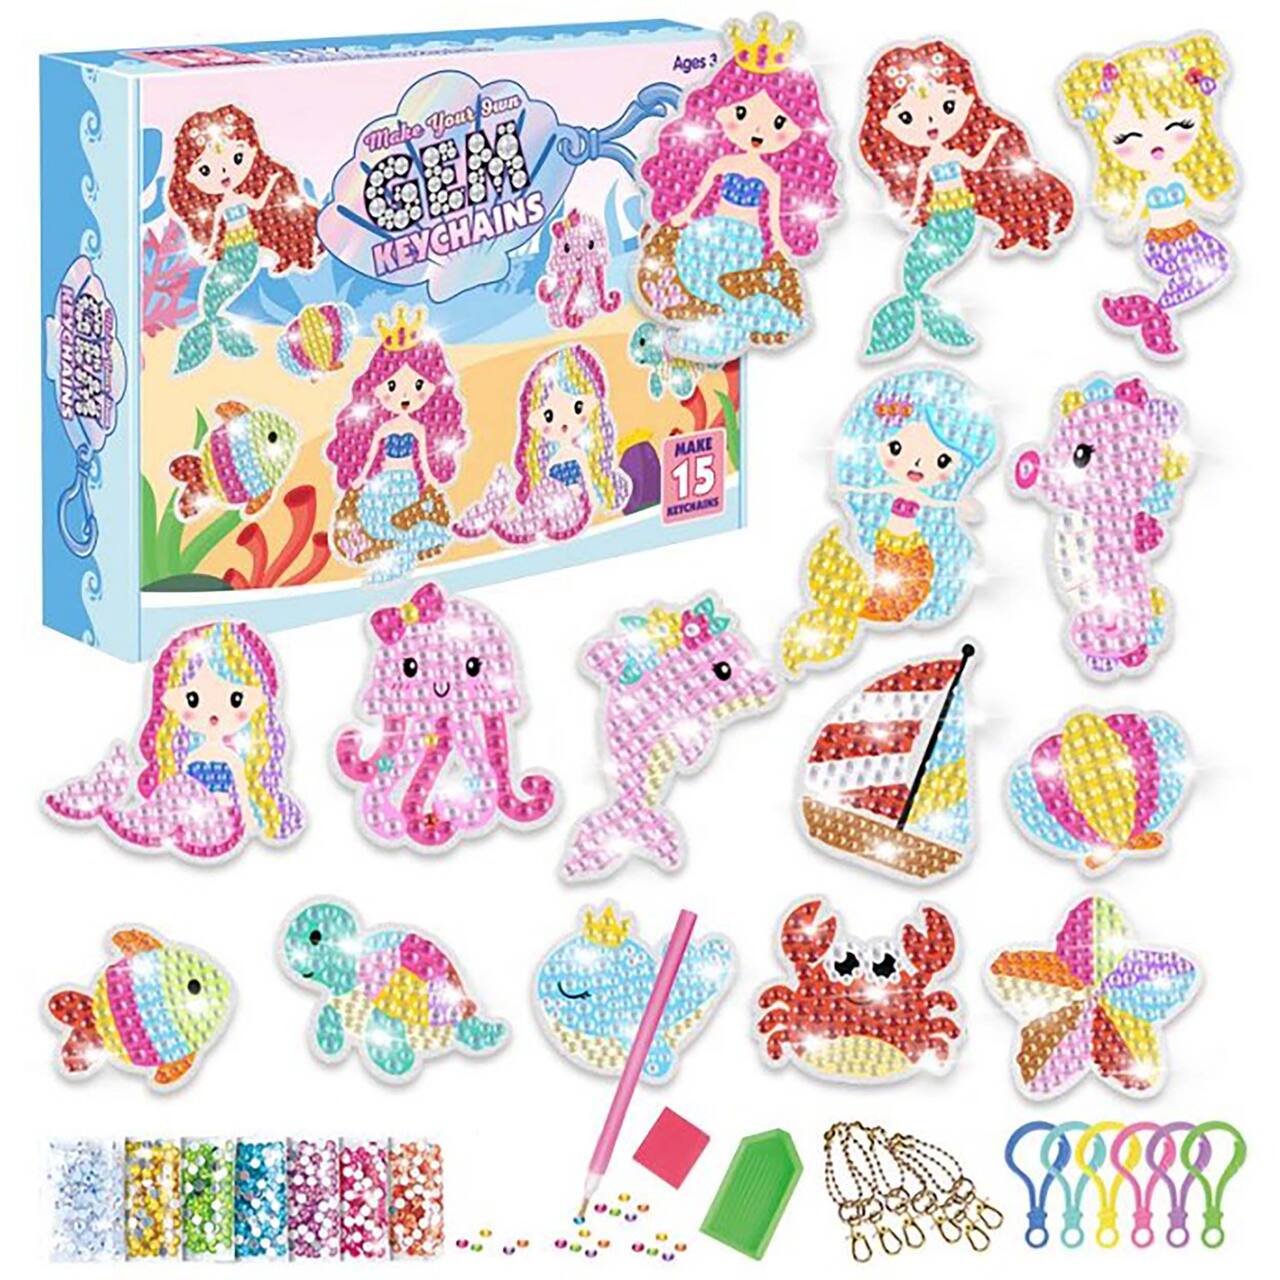 Sparkly Selections Sealife Keychains Set